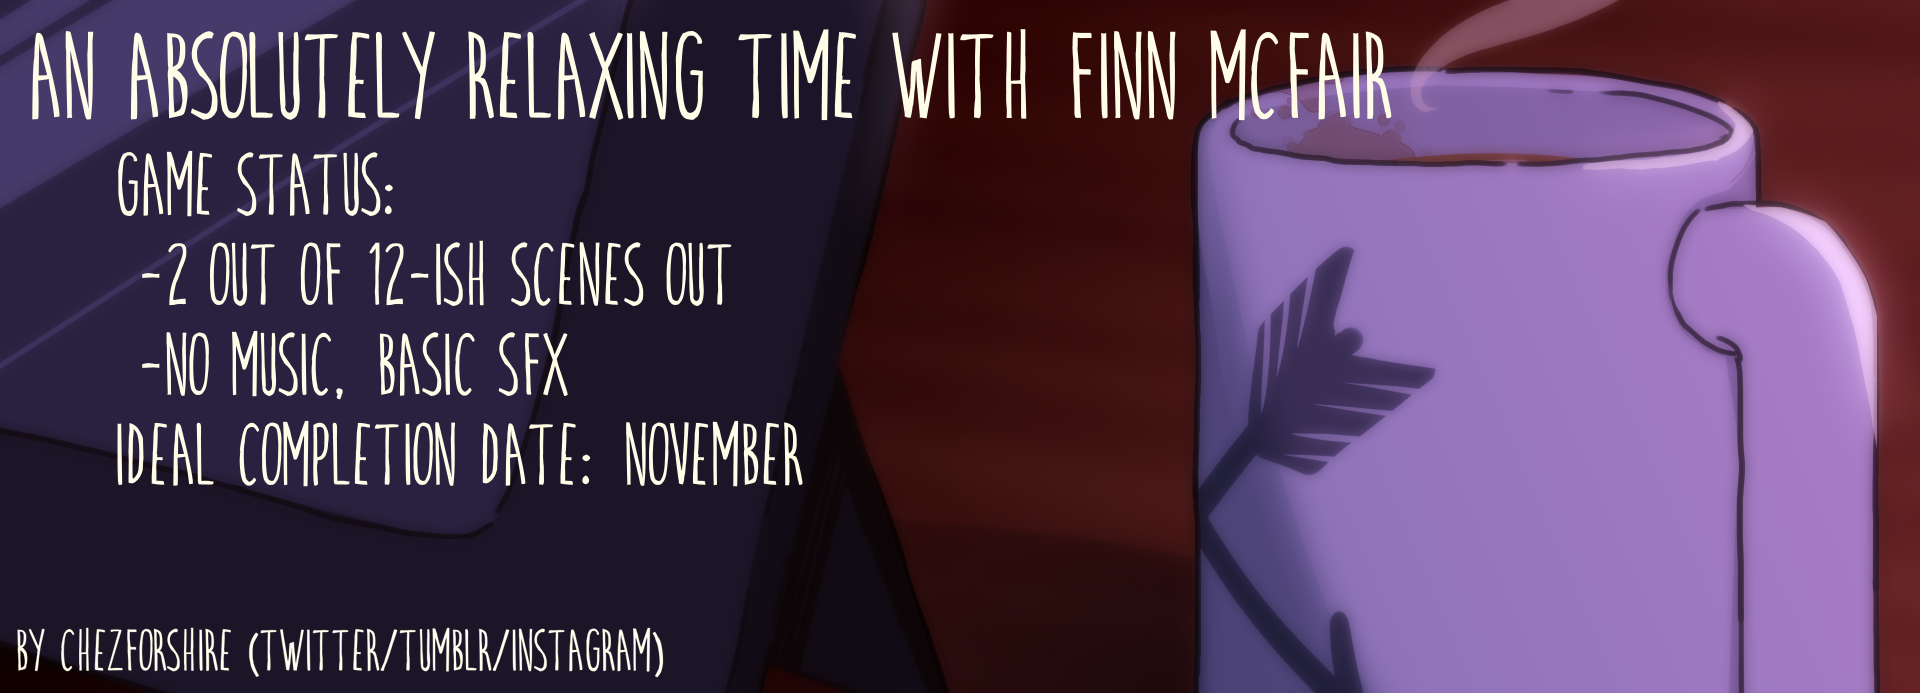 An Absolutely Relaxing Time With Finn McFair